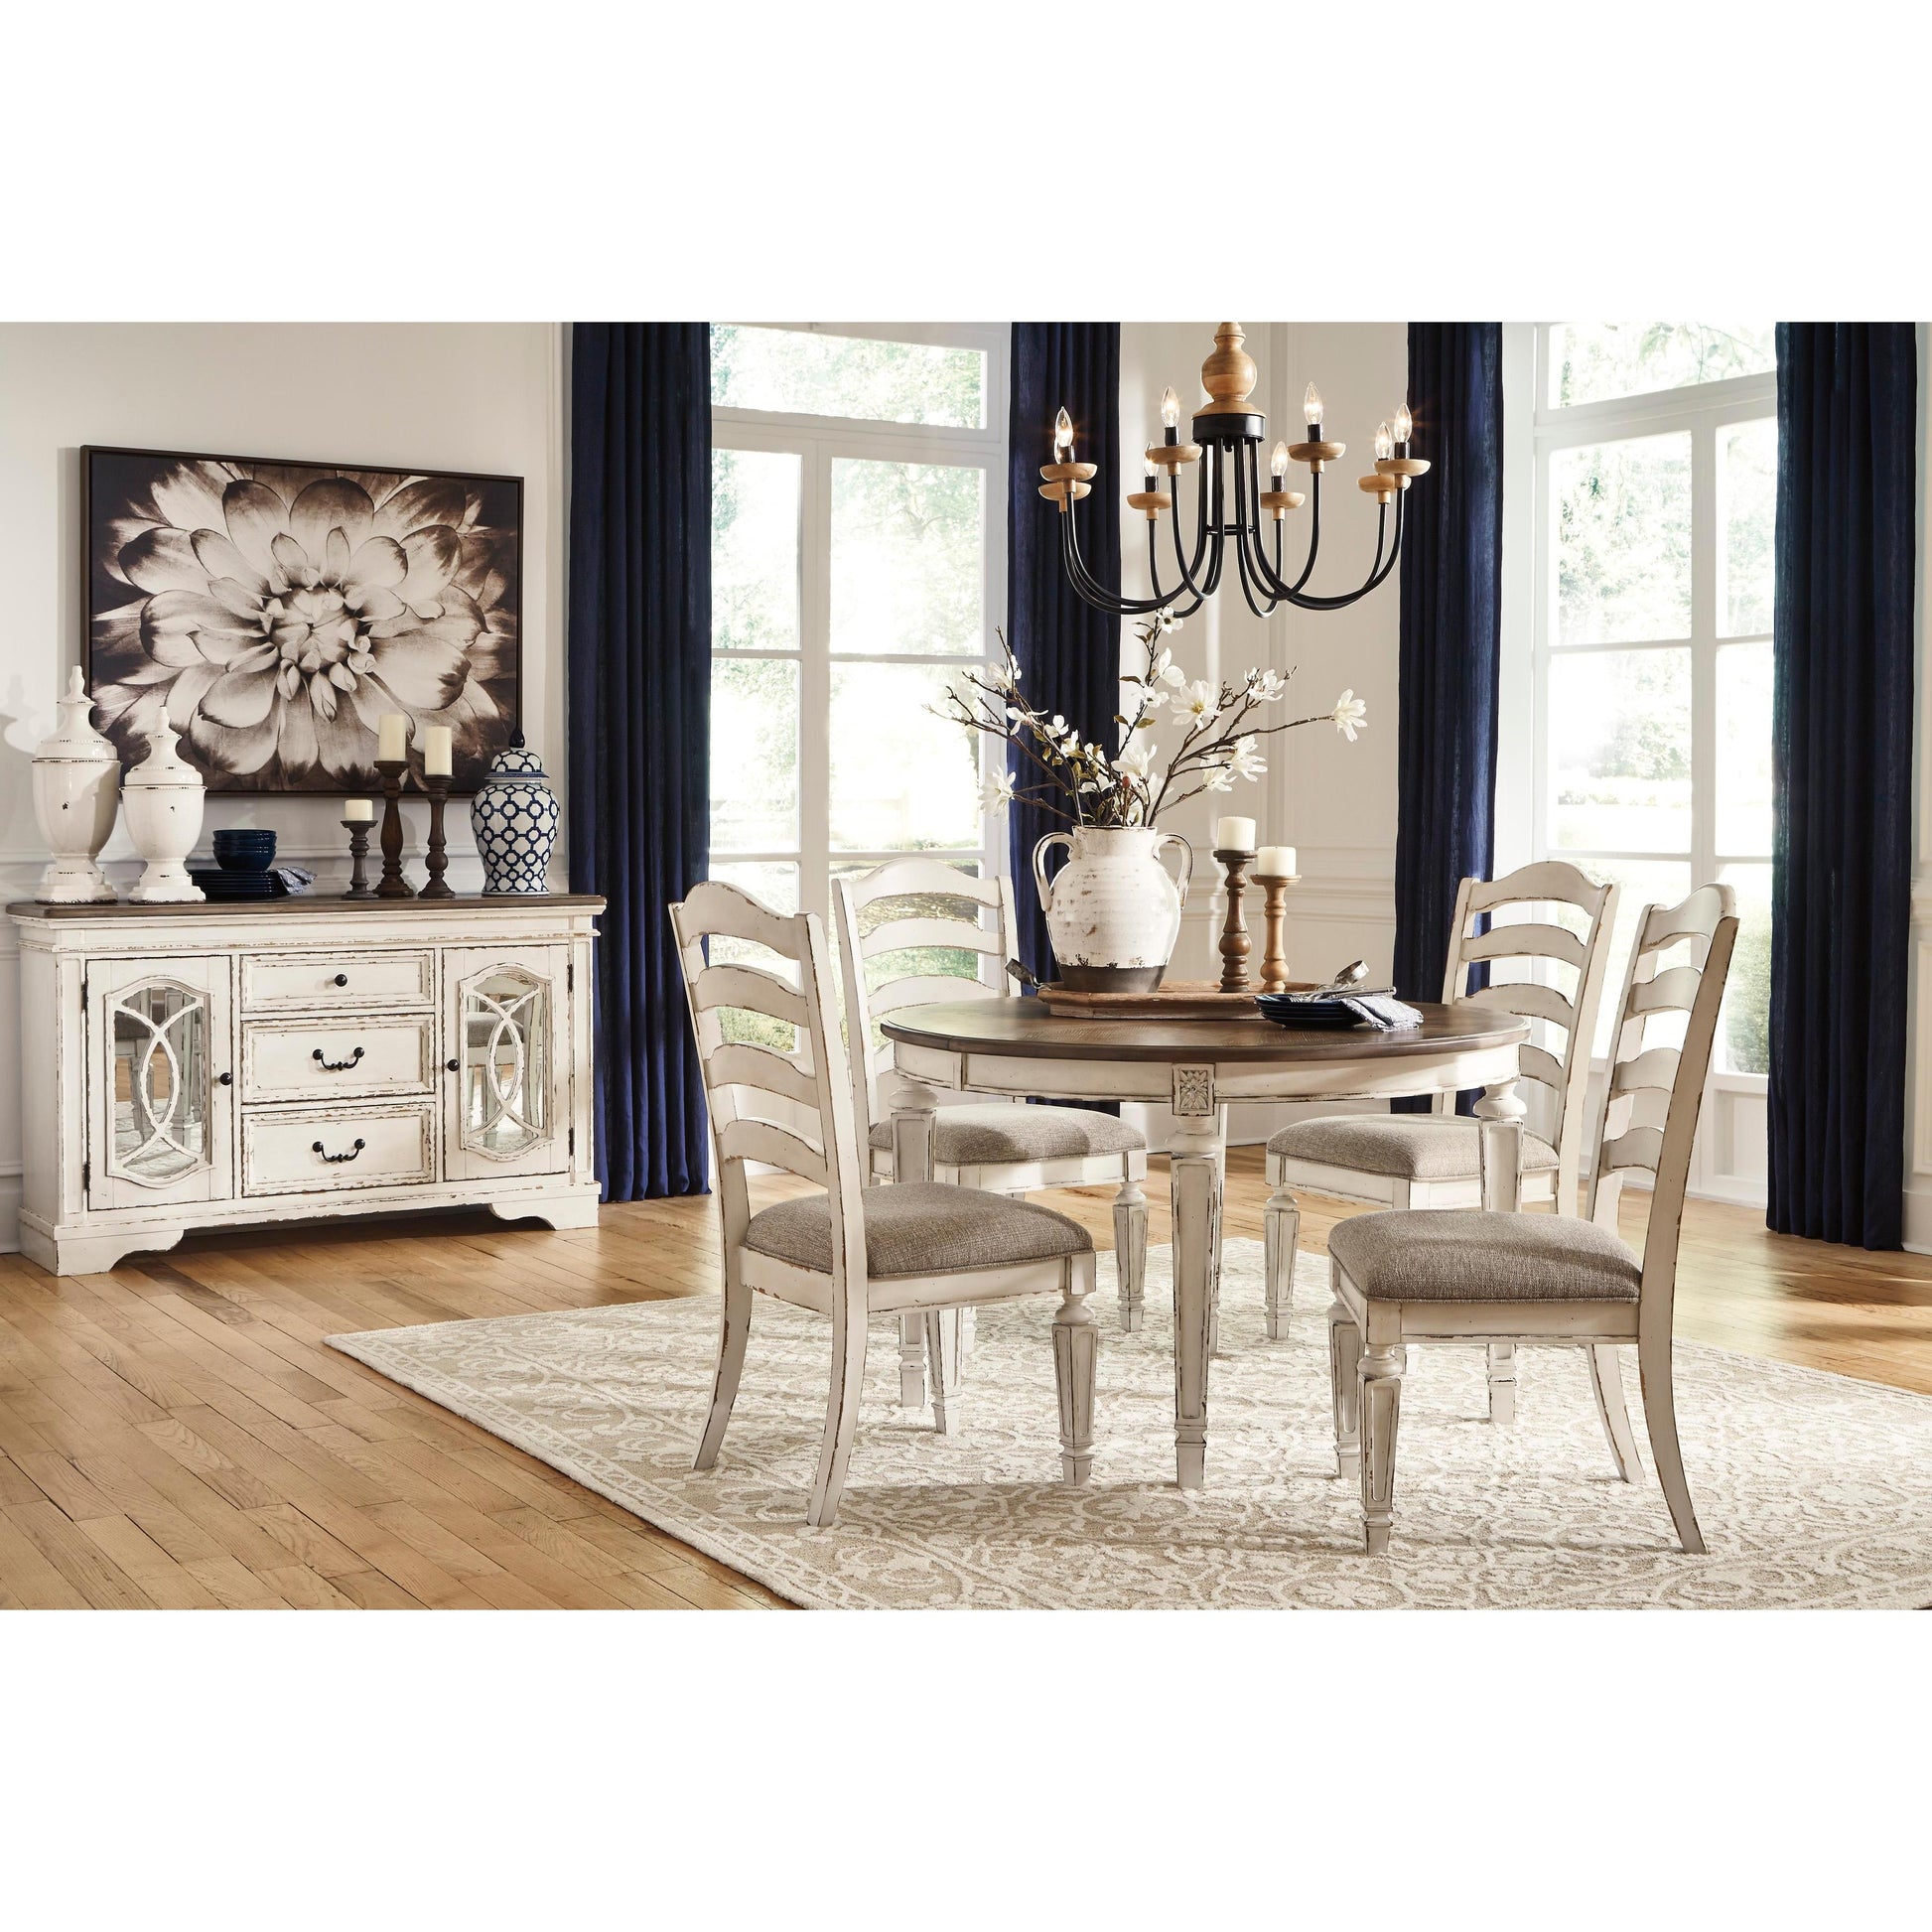 Signature Design by Ashley Realyn D743D1 5 pc Dining Set IMAGE 1